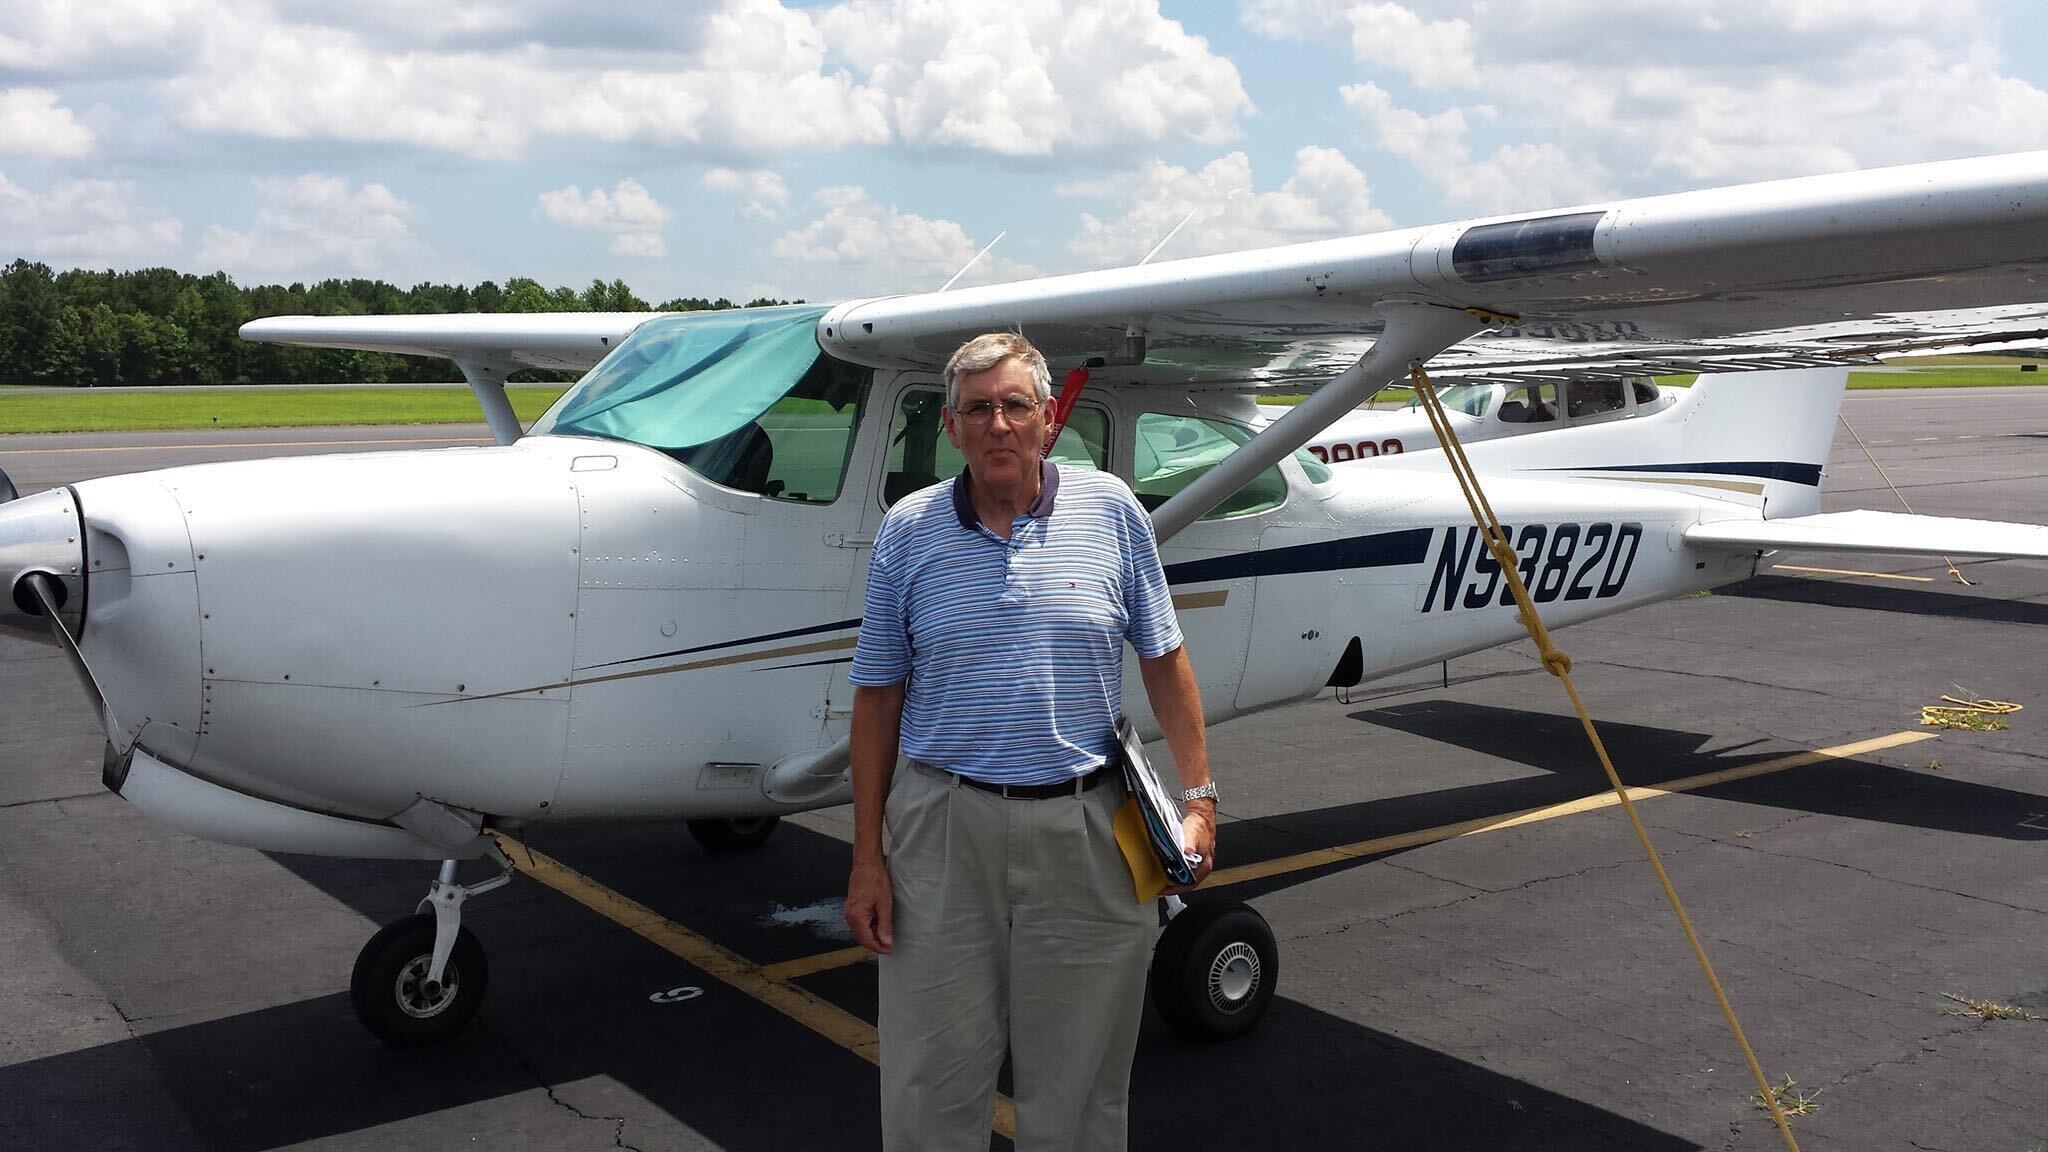 Man stands in front of small plane.